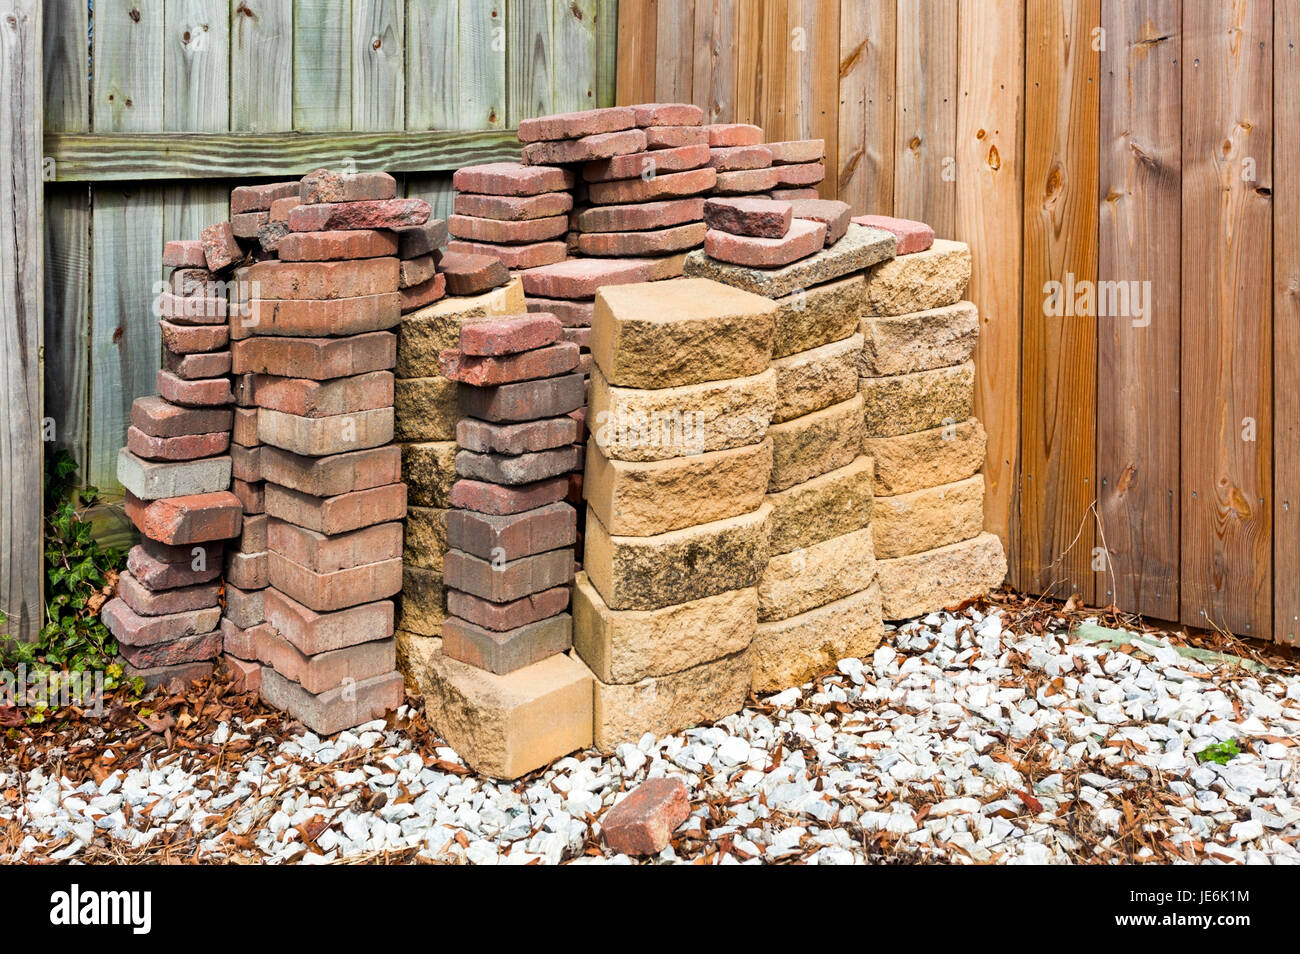 Used bricks and paving stones stacked against wood fence with white gravel foreground. Horizontal. Stock Photo